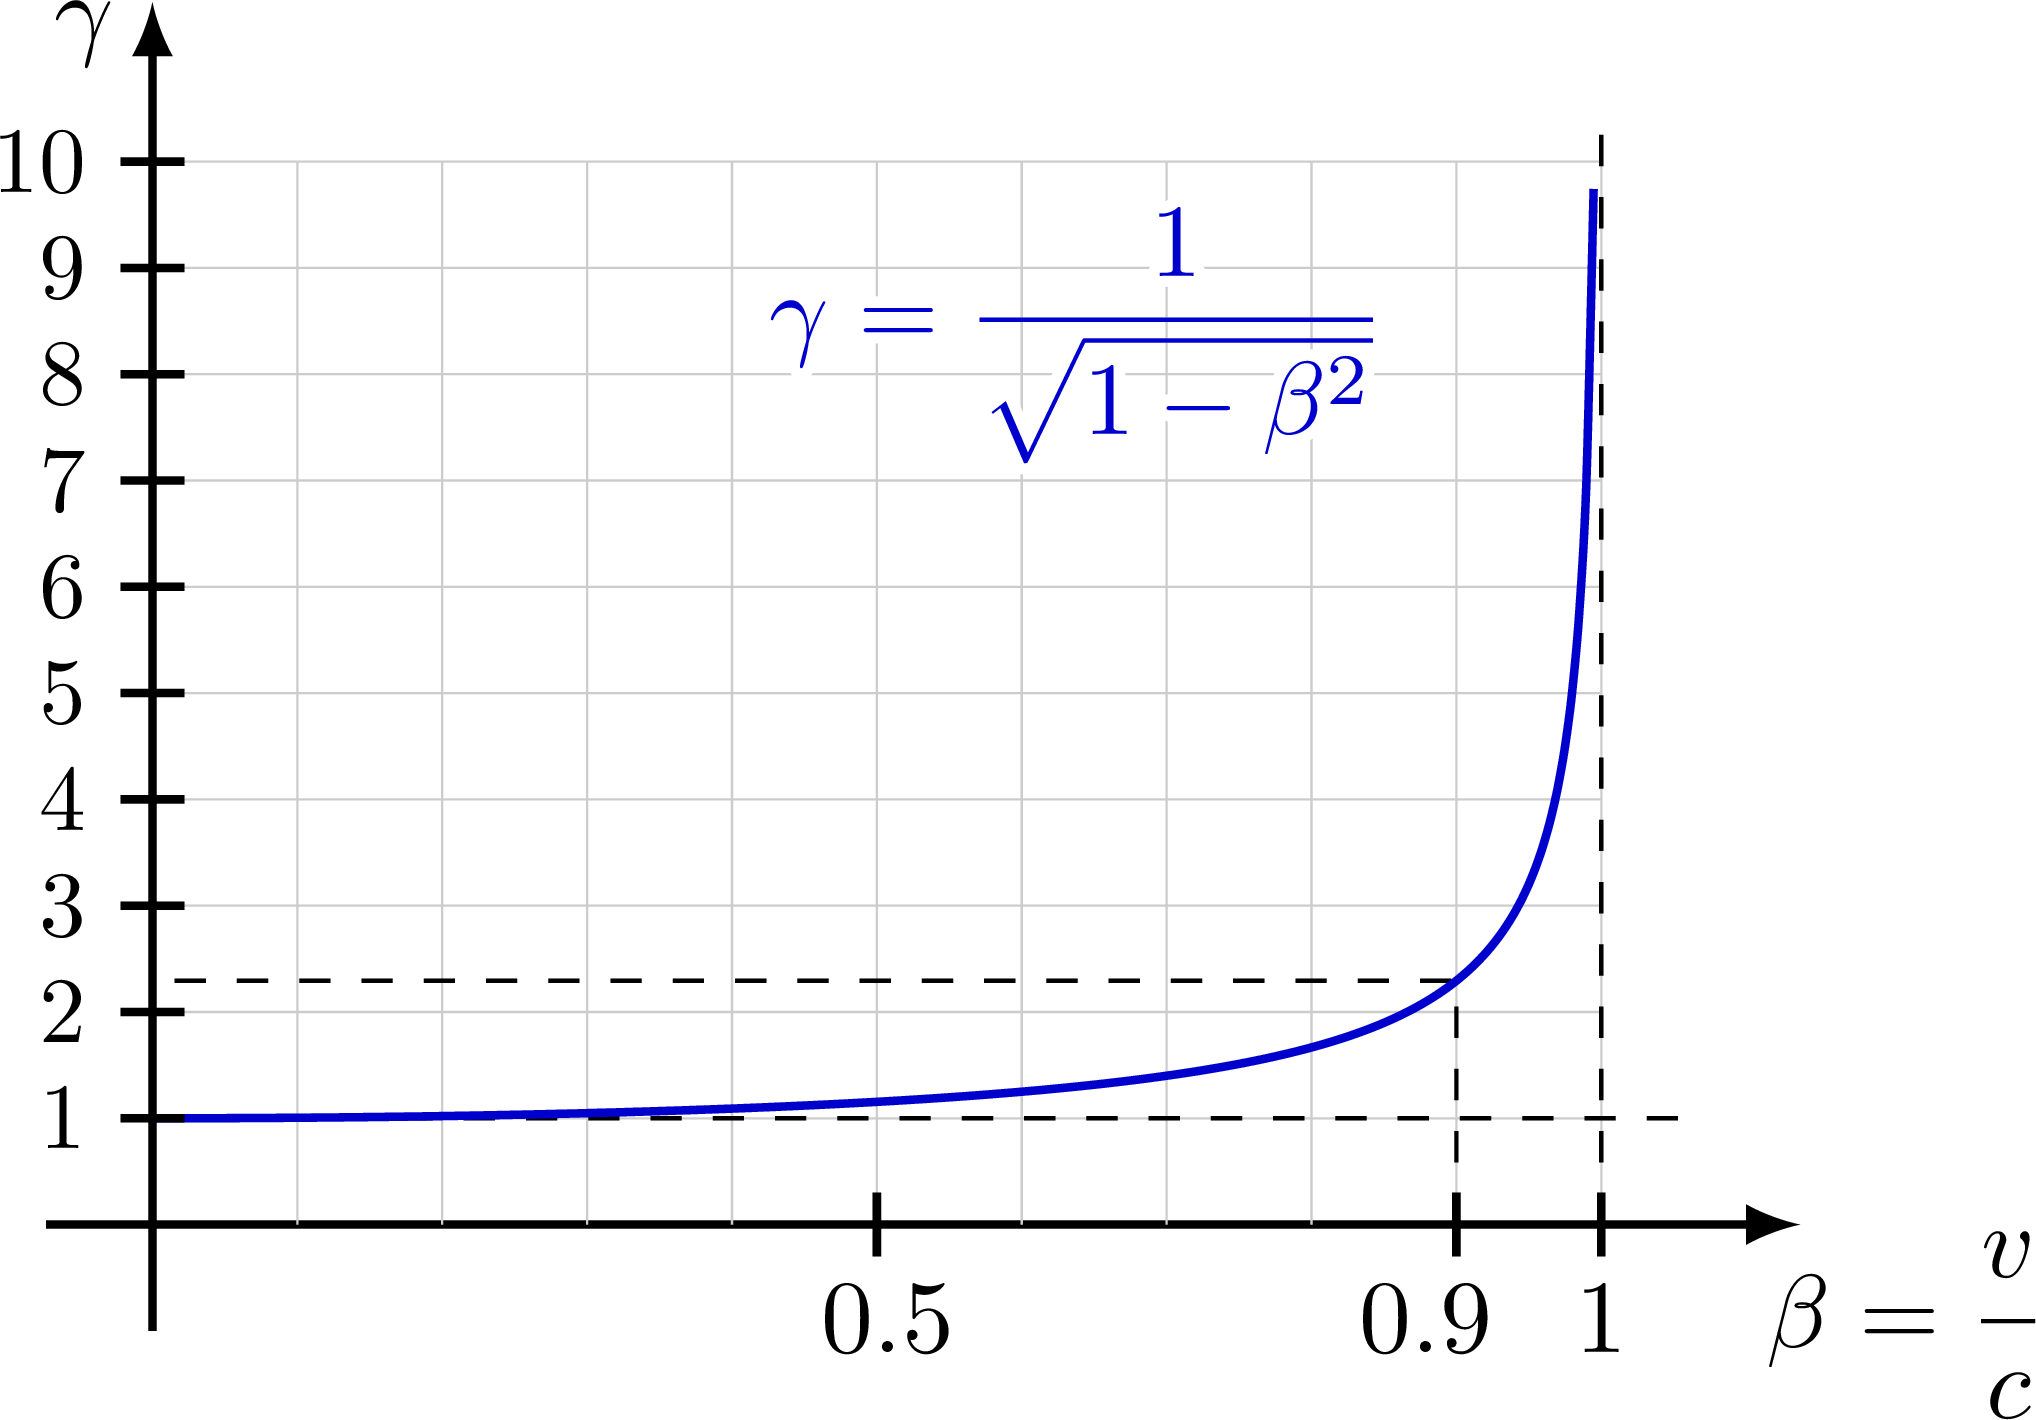 Plot of the Lorentz factor as a function of velocity.